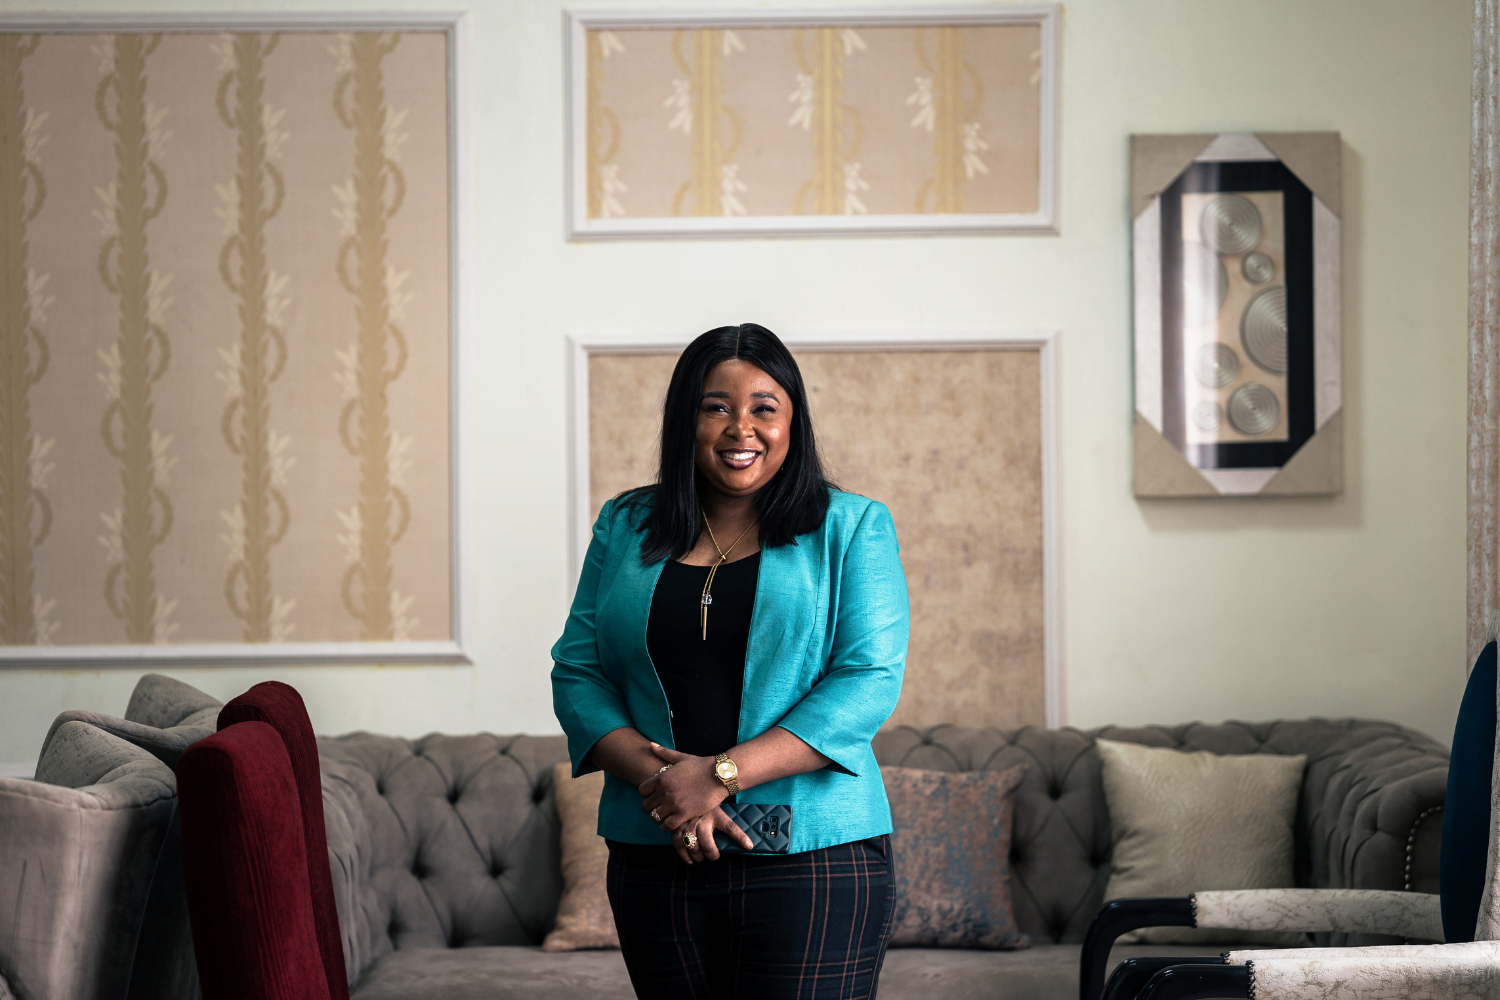 Glory Omoregie, CEO of Home Craft Interiors and Projects in Lagos, Nigeria